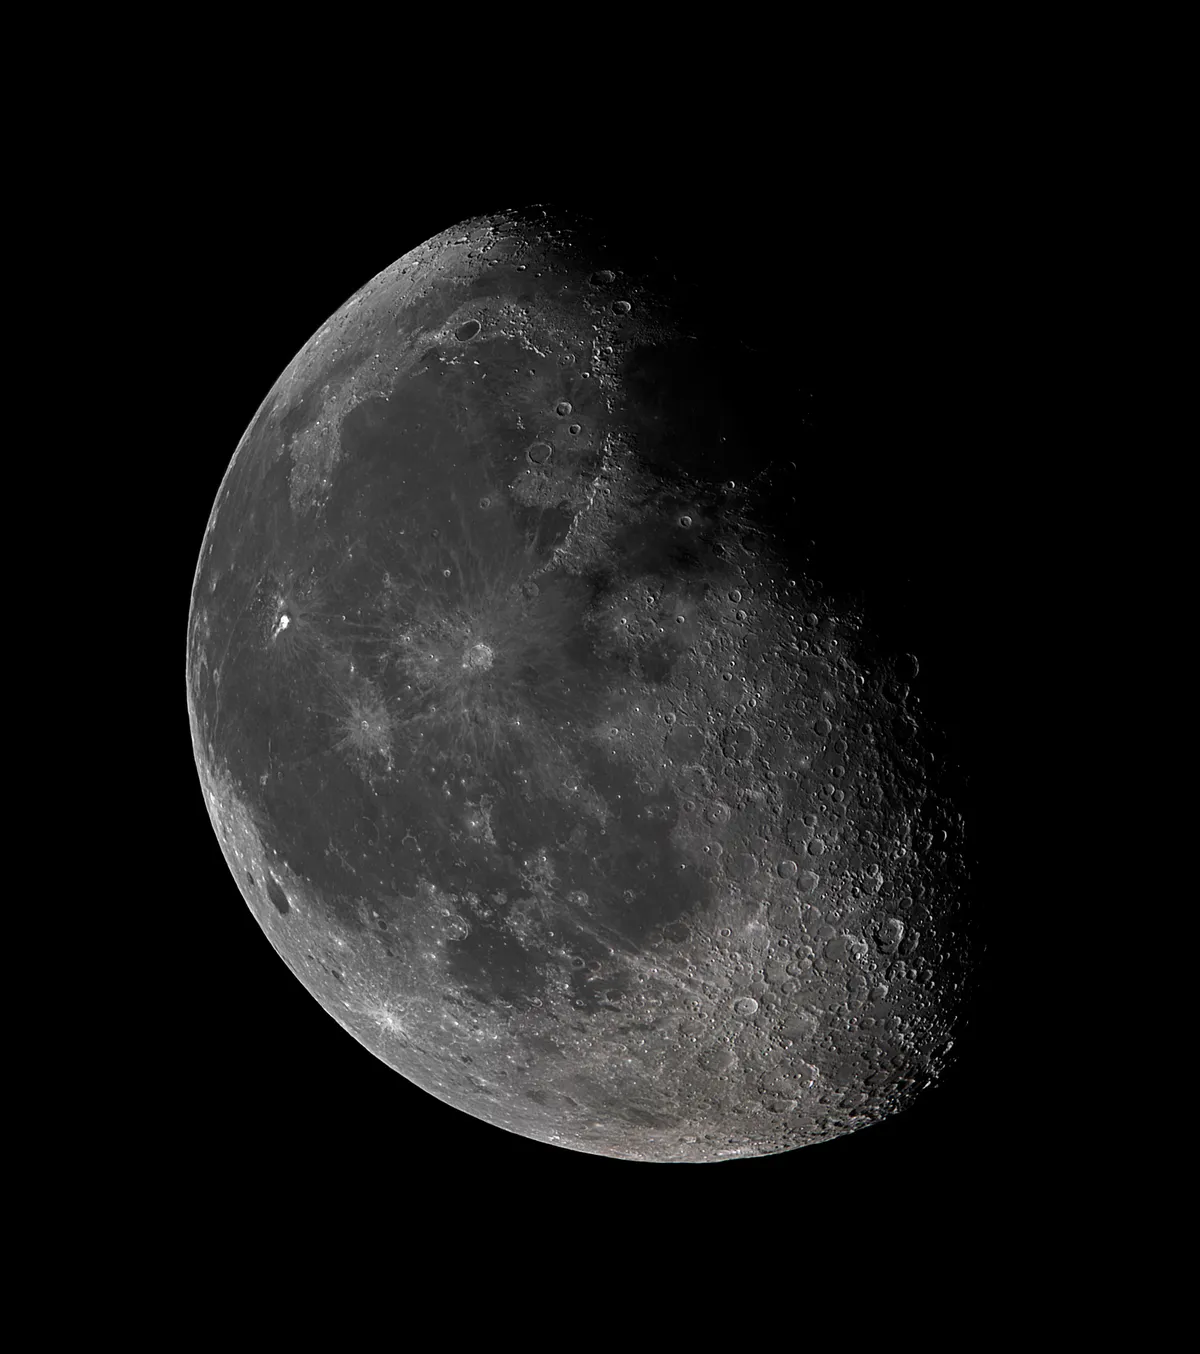 Waning moon by Tom Howard, Crawley, Sussex, UK. Equipment: Meade 5000 127mm refractor, EQ6, Imaging Source DBK21 camera.